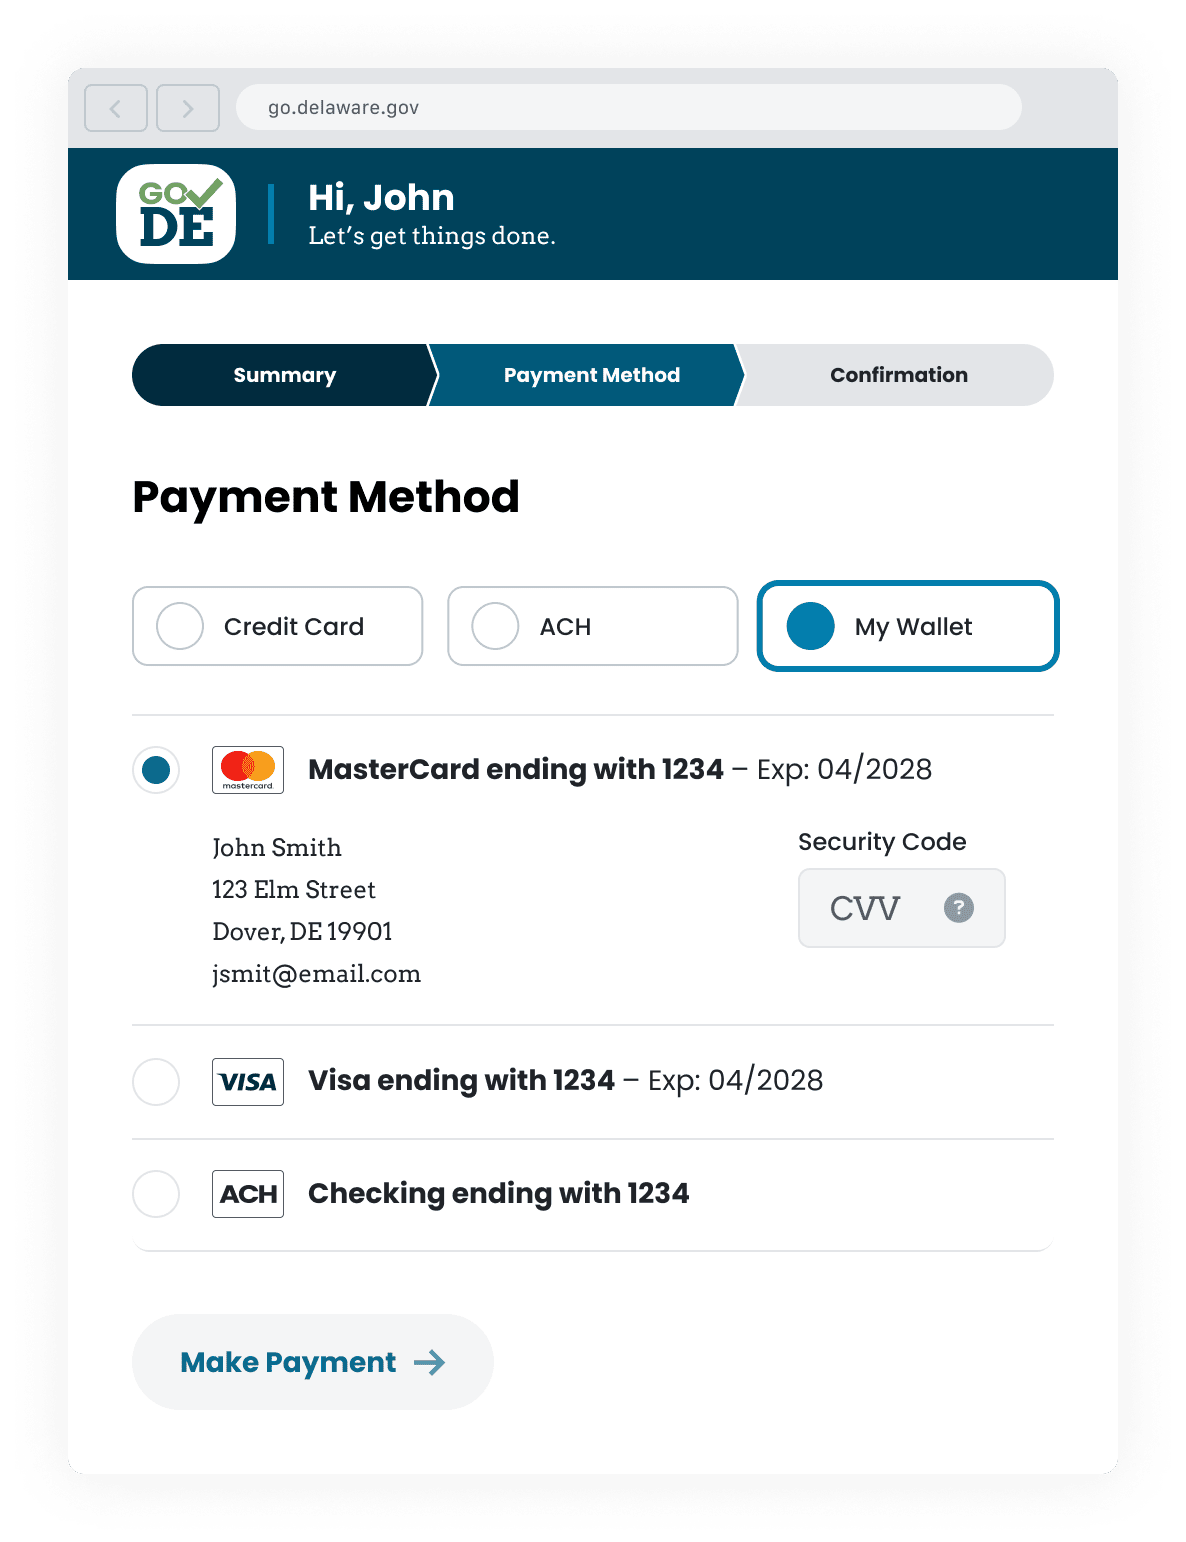 The Go DE payment method screen which includes the option to store credit card or ACH bank account information and a button that allows the user to make a payment